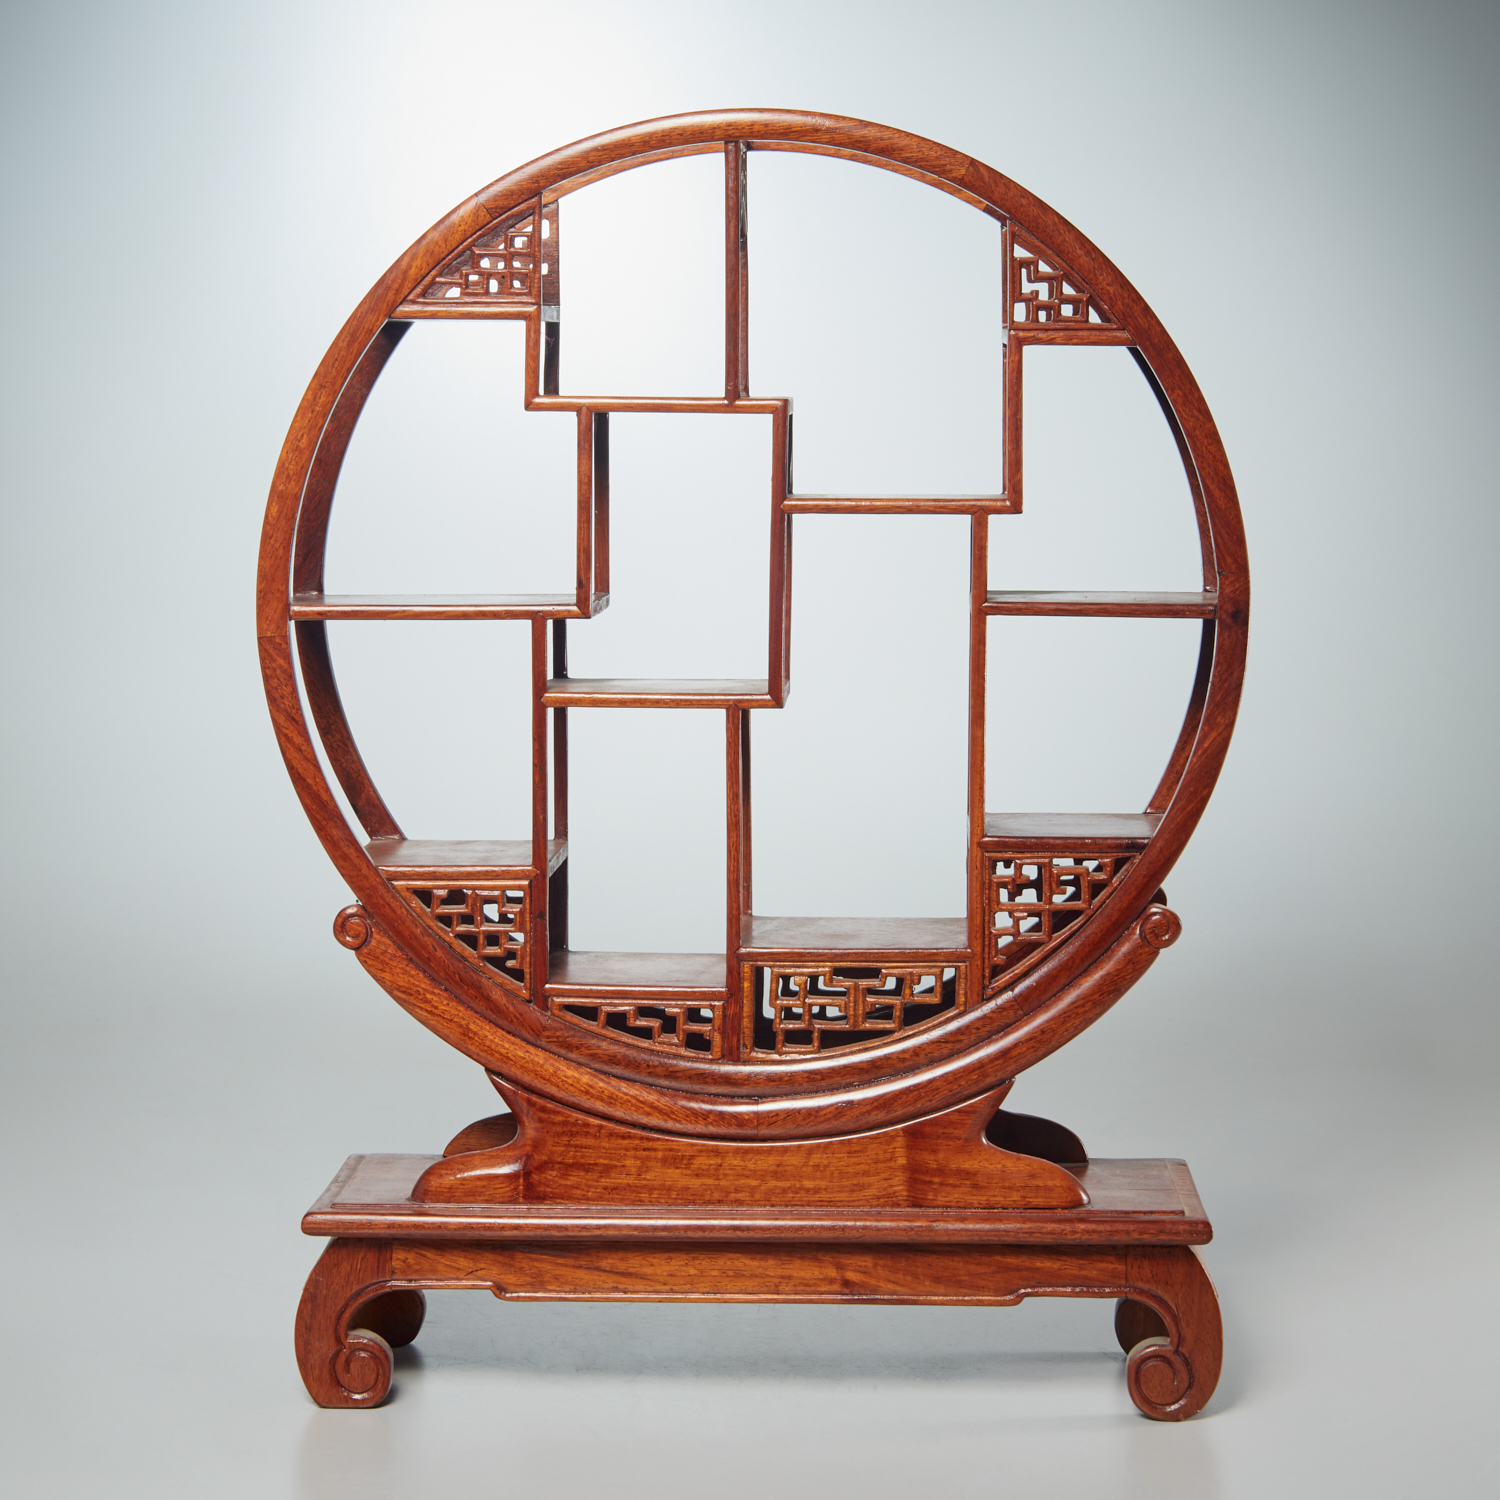 CHINESE CARVED HARDWOOD FULL MOON 36121f